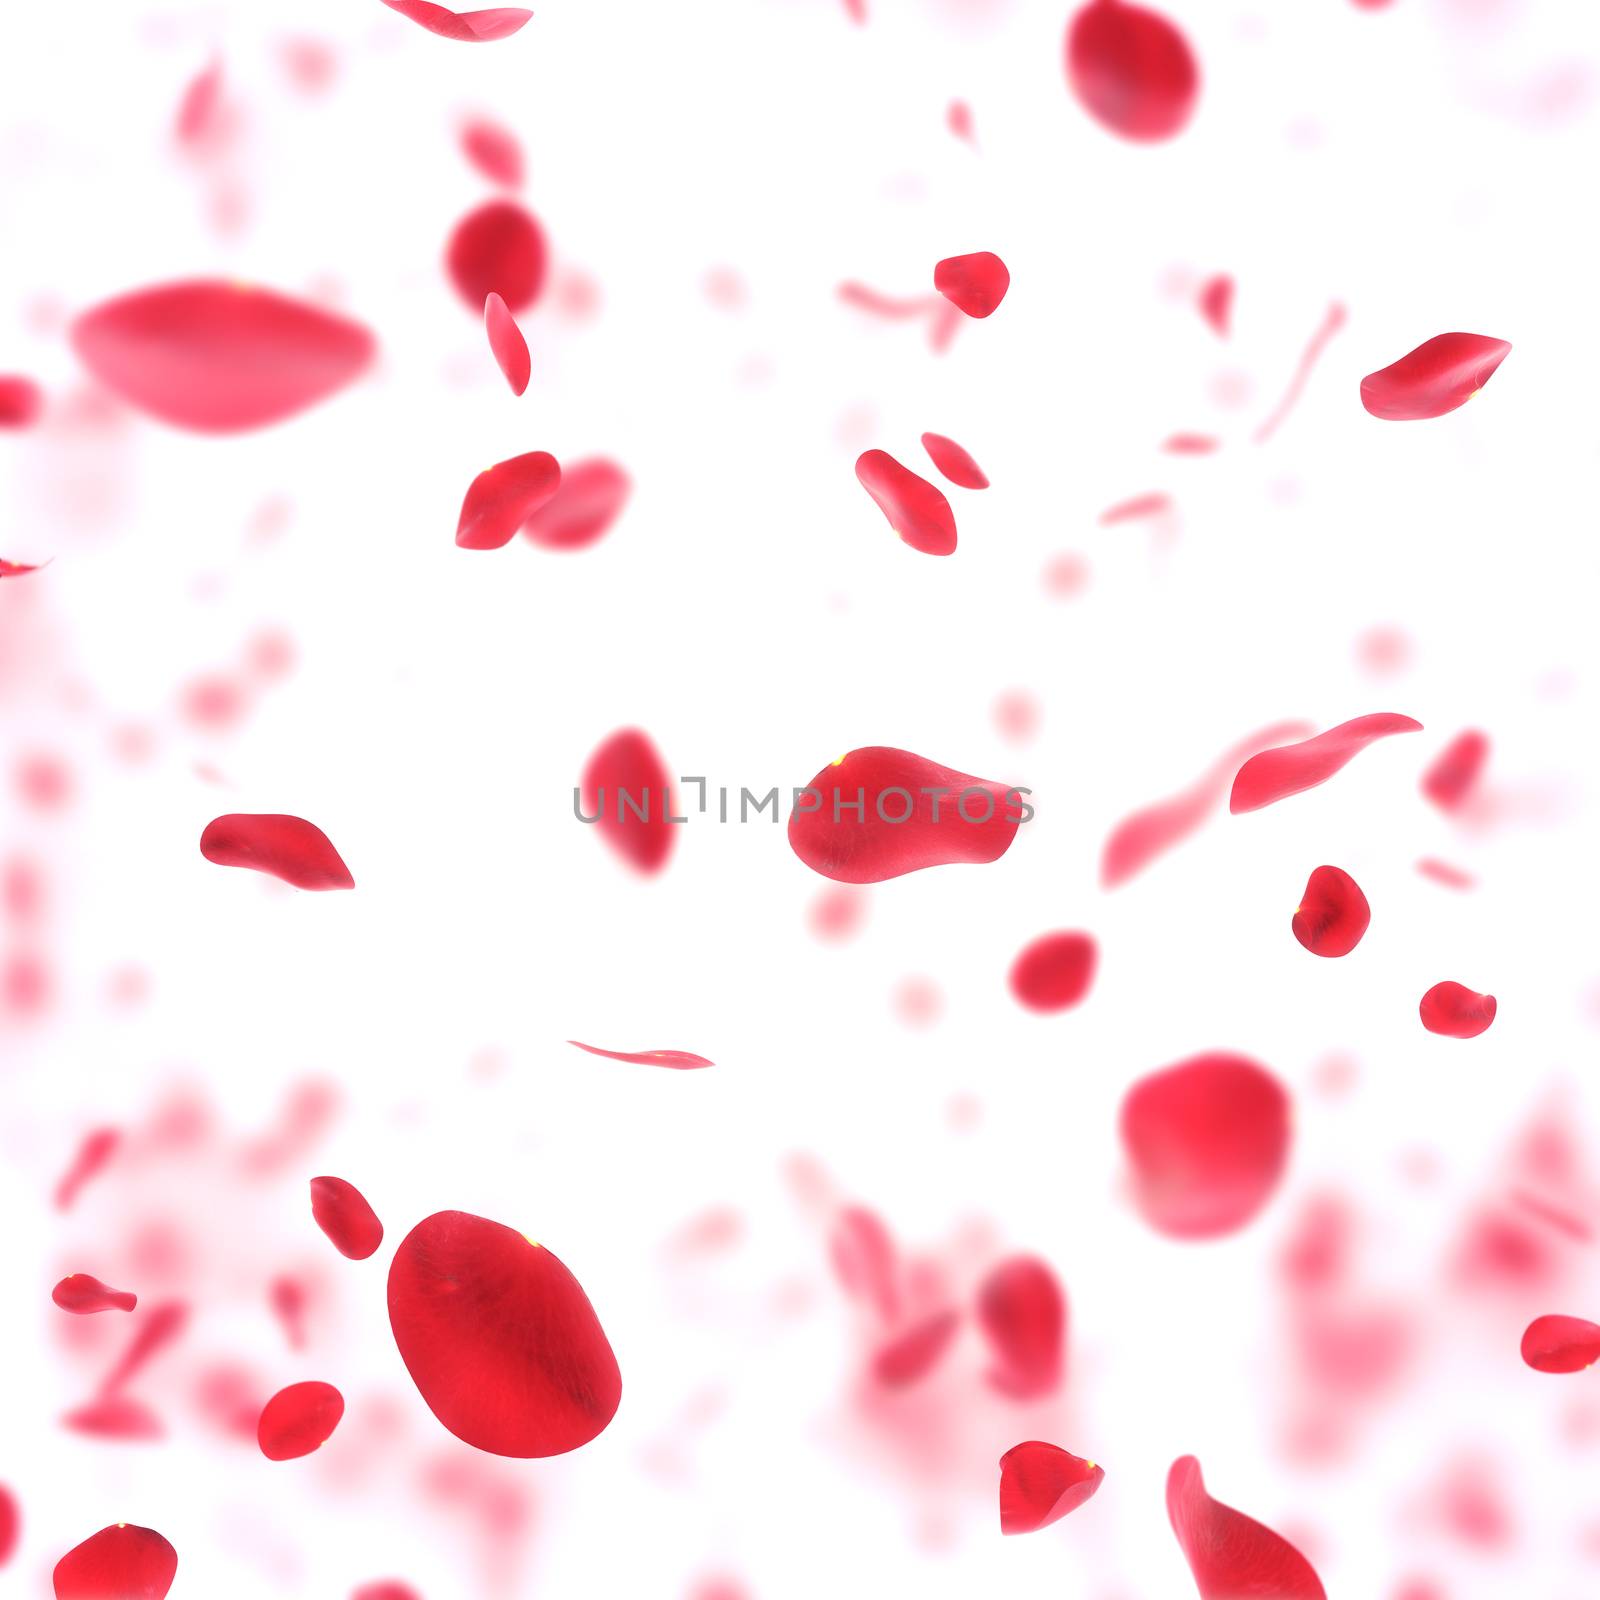 Falling rose petals background  by 123dartist